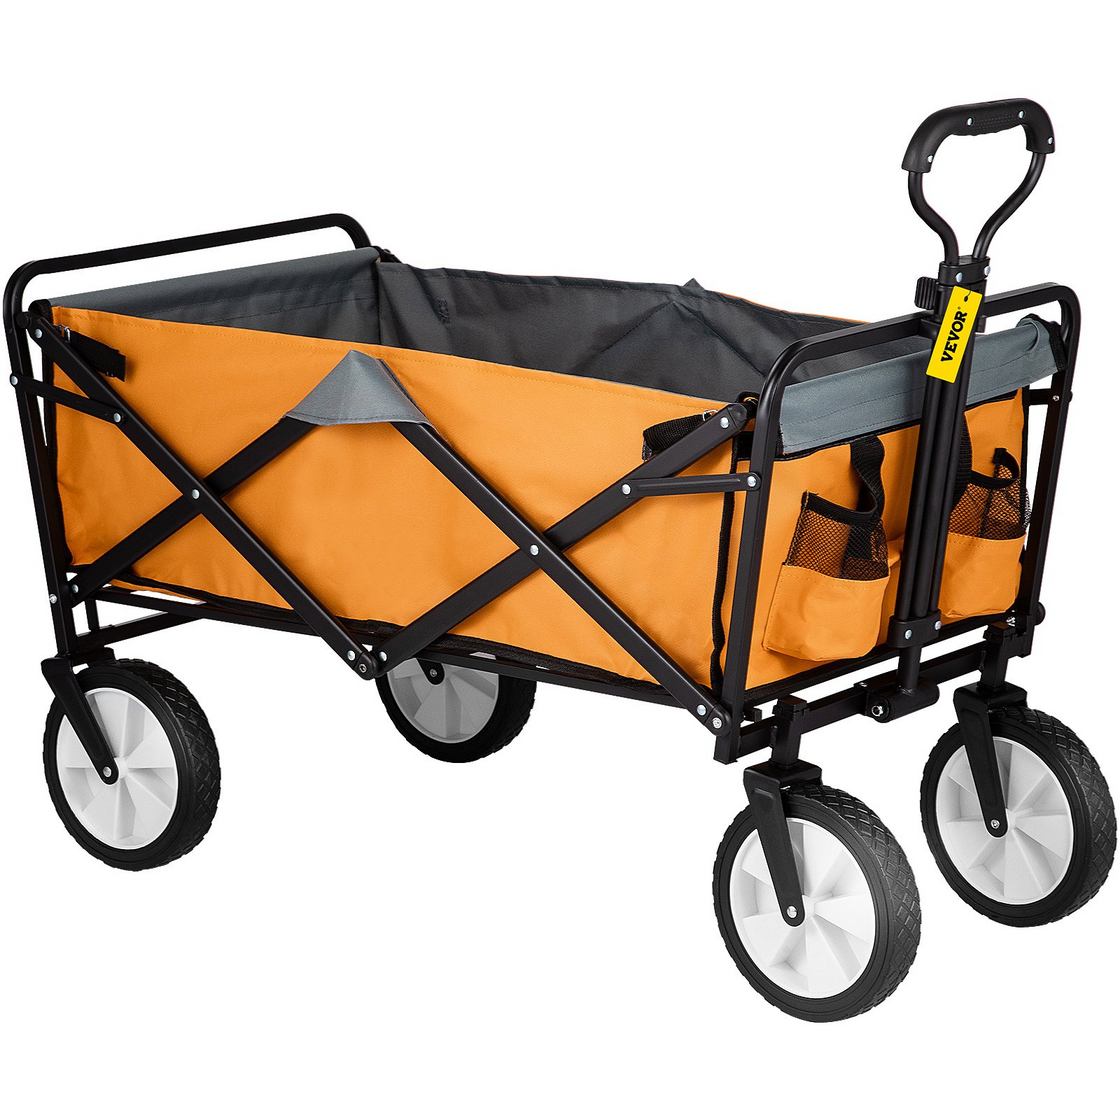 VEVOR Wagon Cart - Collapsible Folding Garden Cart with 176lbs Load